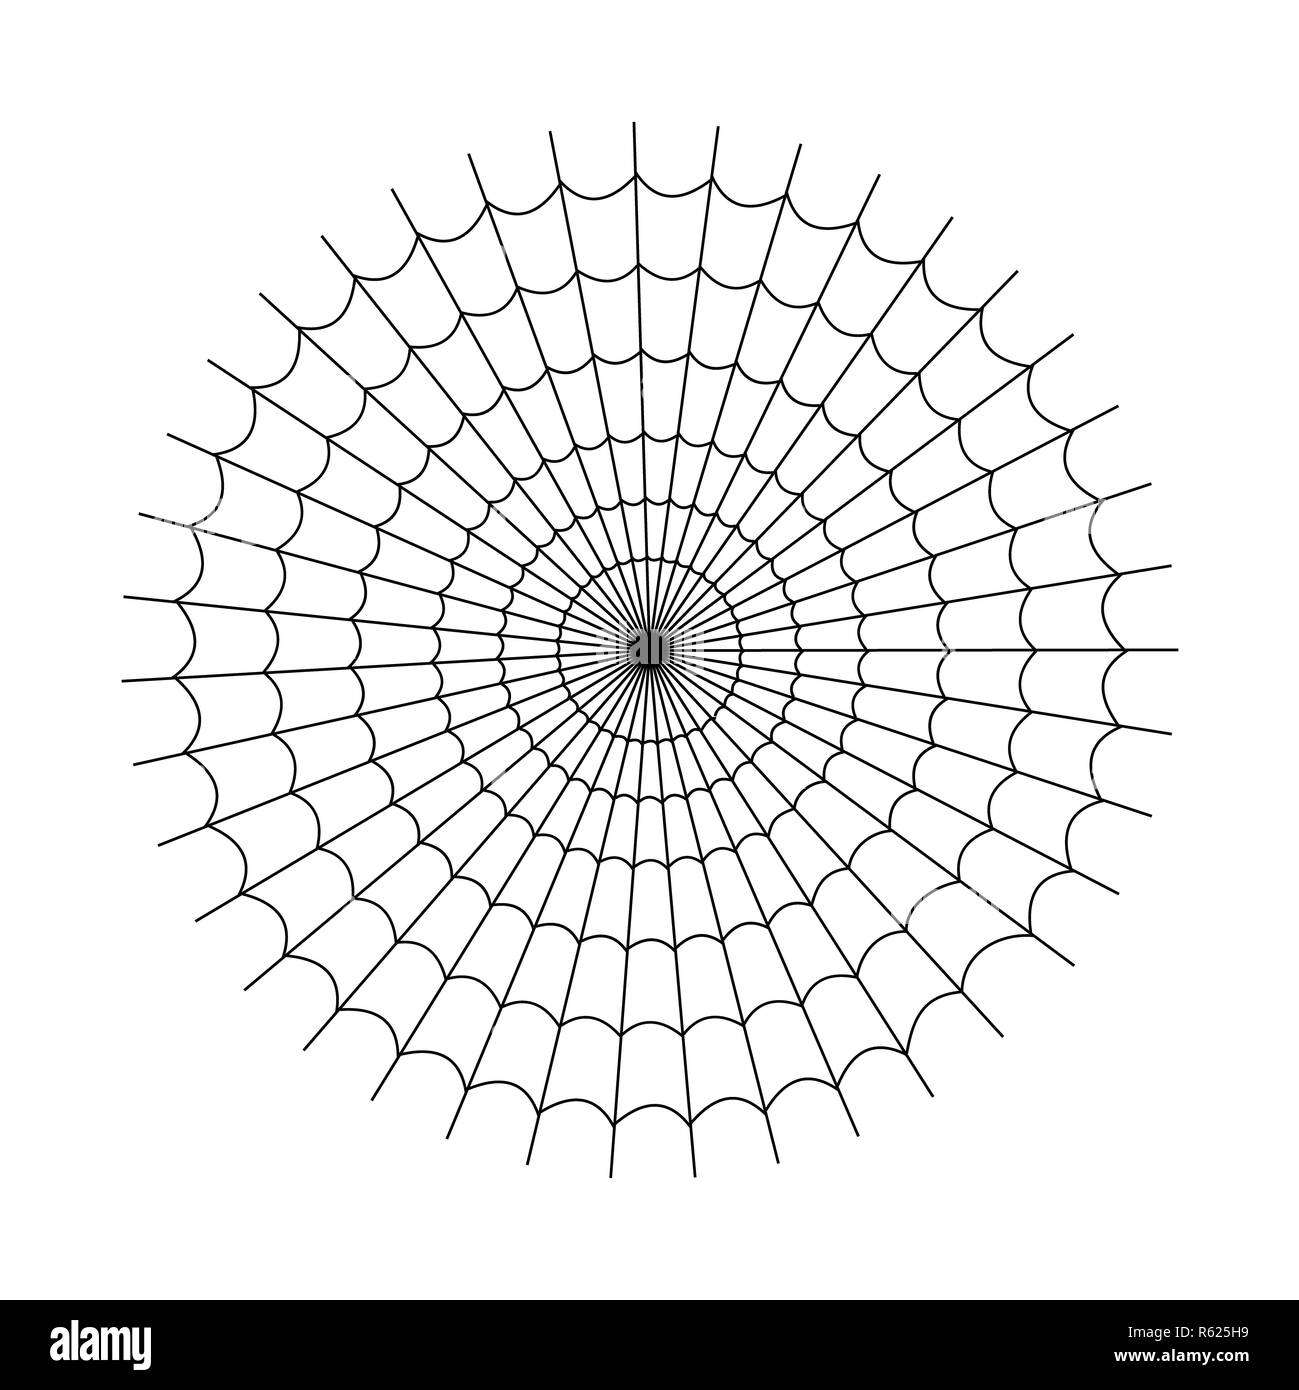 Black and white vector cartoon spider web. Simple image with cobweb for halloween party. Stock Photo